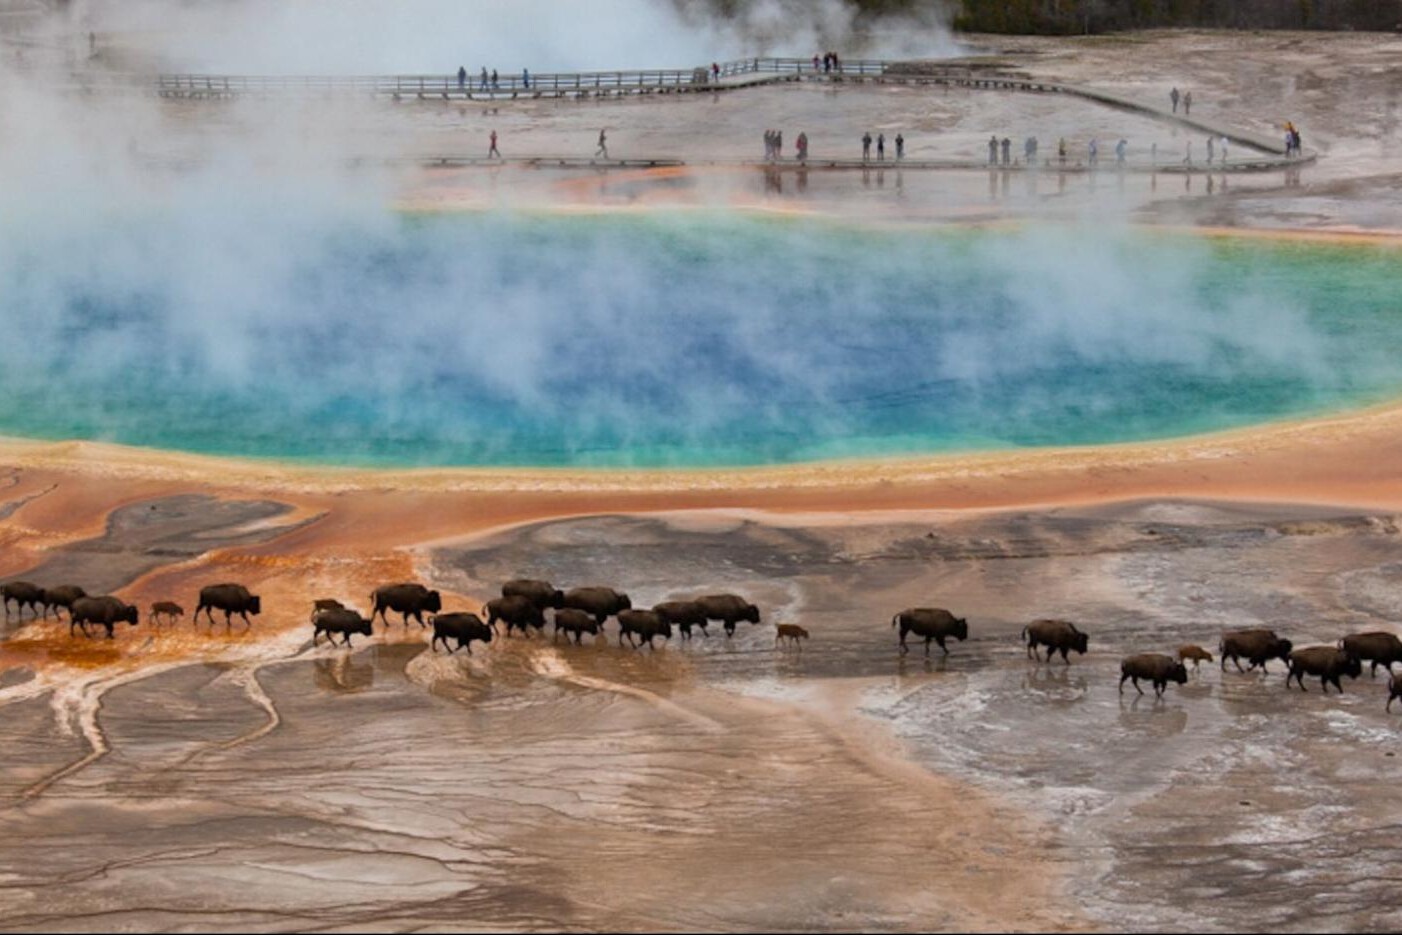 Photograph of a hot pool at Yellowstone